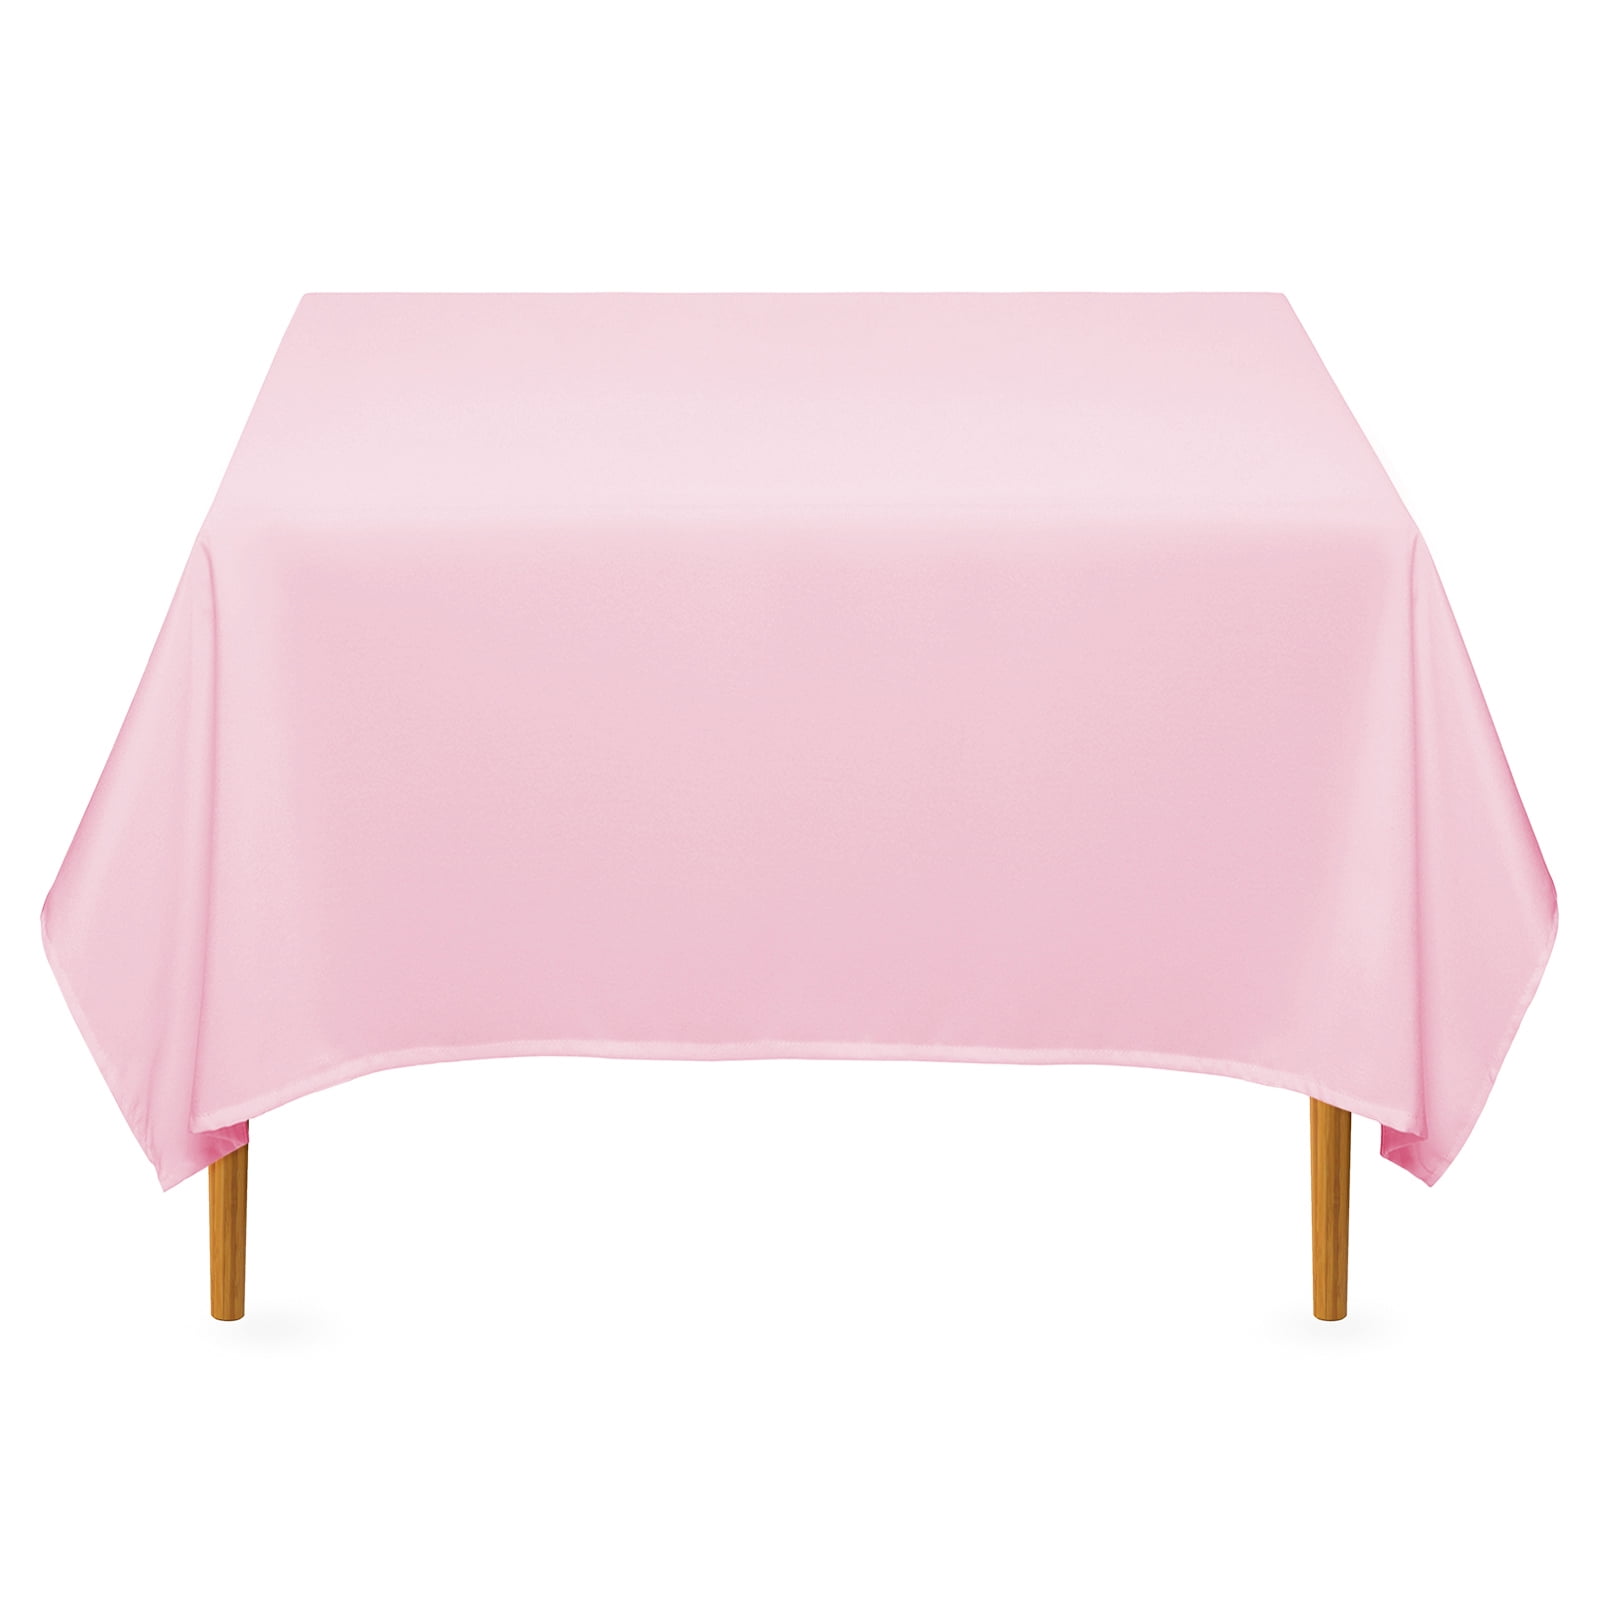 70 in Squre Seamless Tablecloth Wedding Party Banquet Restaurant 